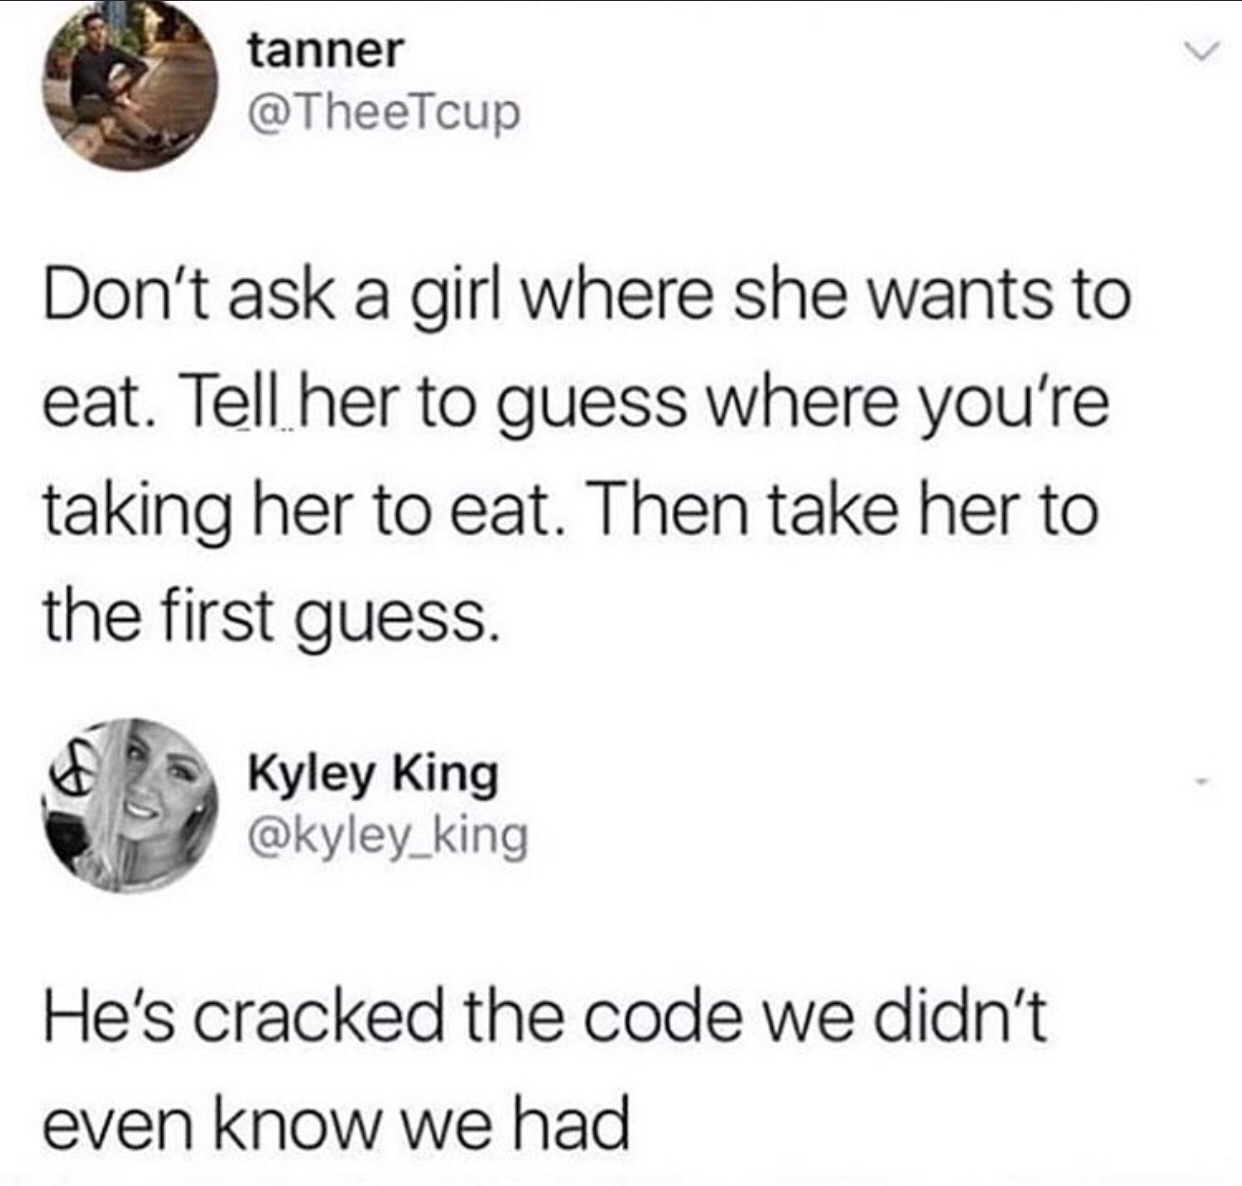 dada art movement memes - tanner Don't ask a girl where she wants to eat. Tell her to guess where you're taking her to eat. Then take her to the first guess. Kyley King He's cracked the code we didn't even know we had